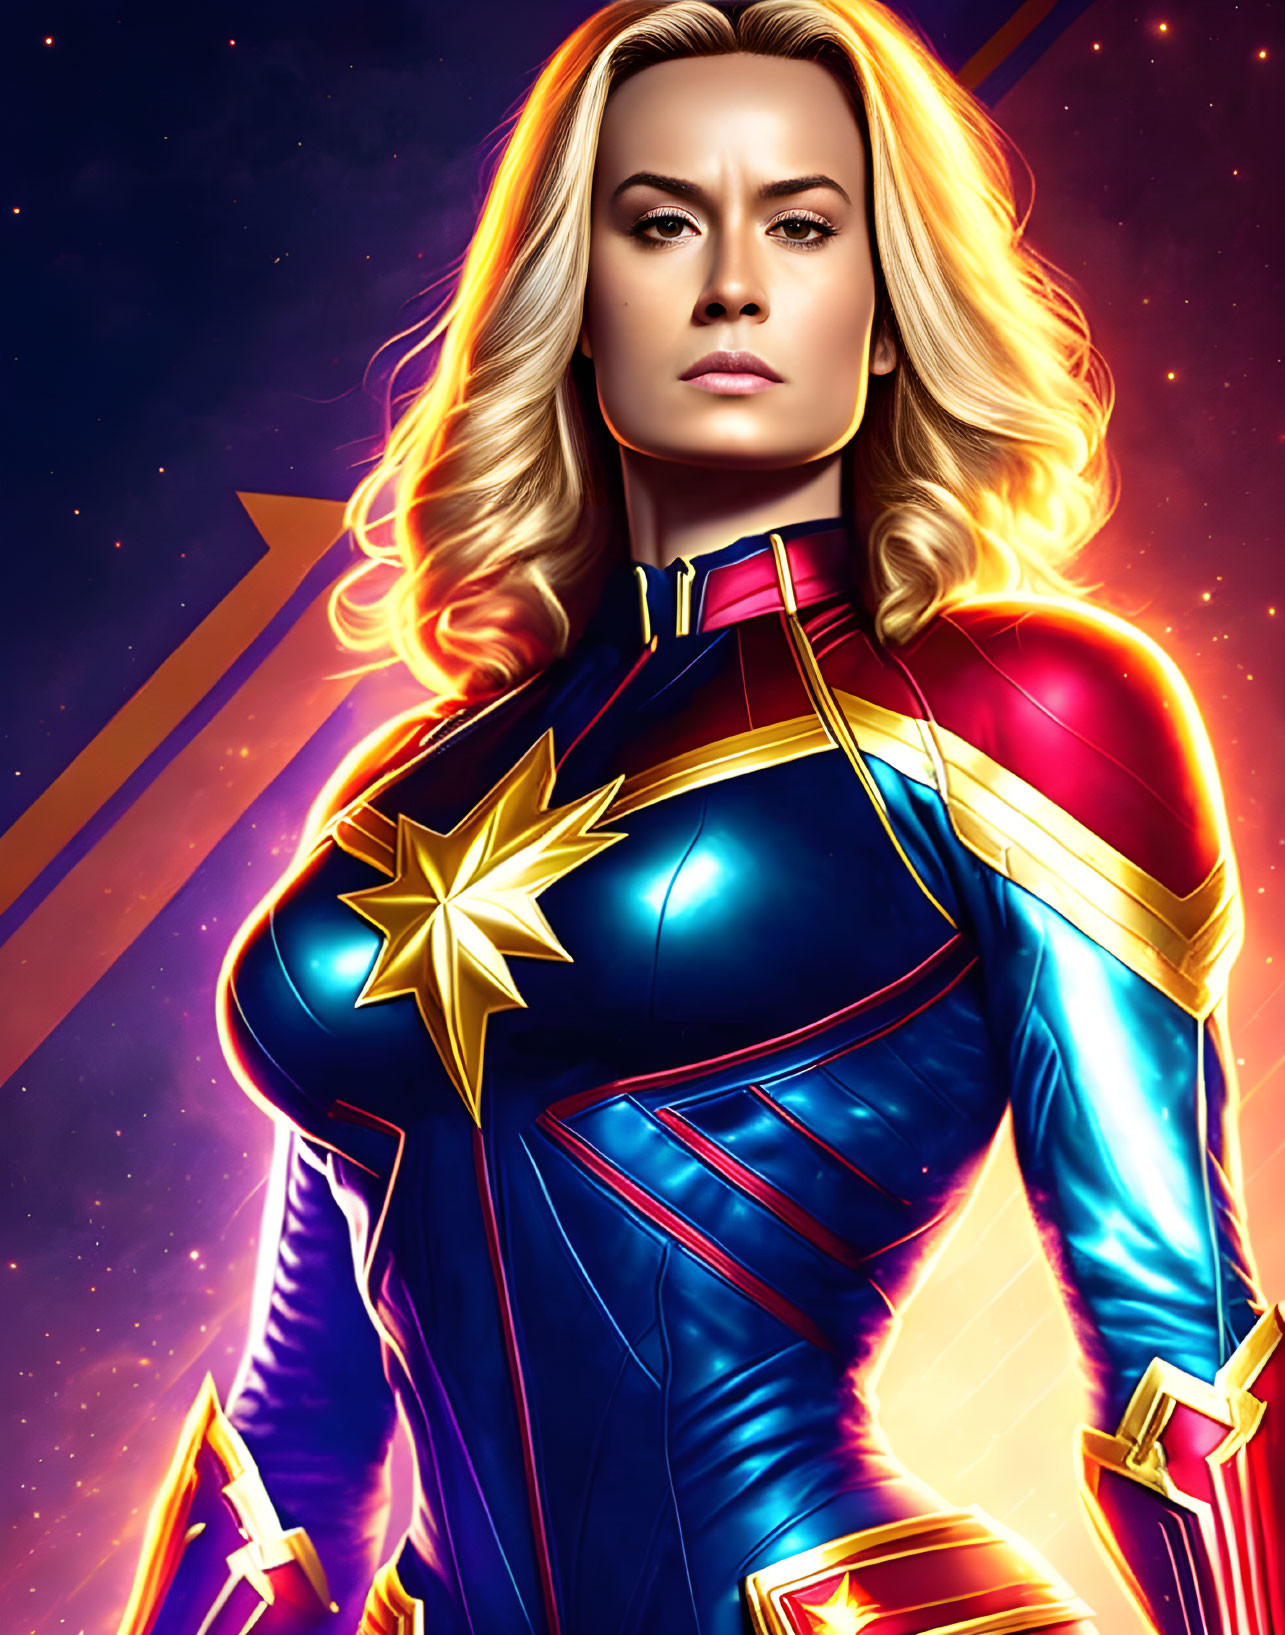 Blonde Female Superhero in Red, Blue, and Gold Costume on Cosmic Background